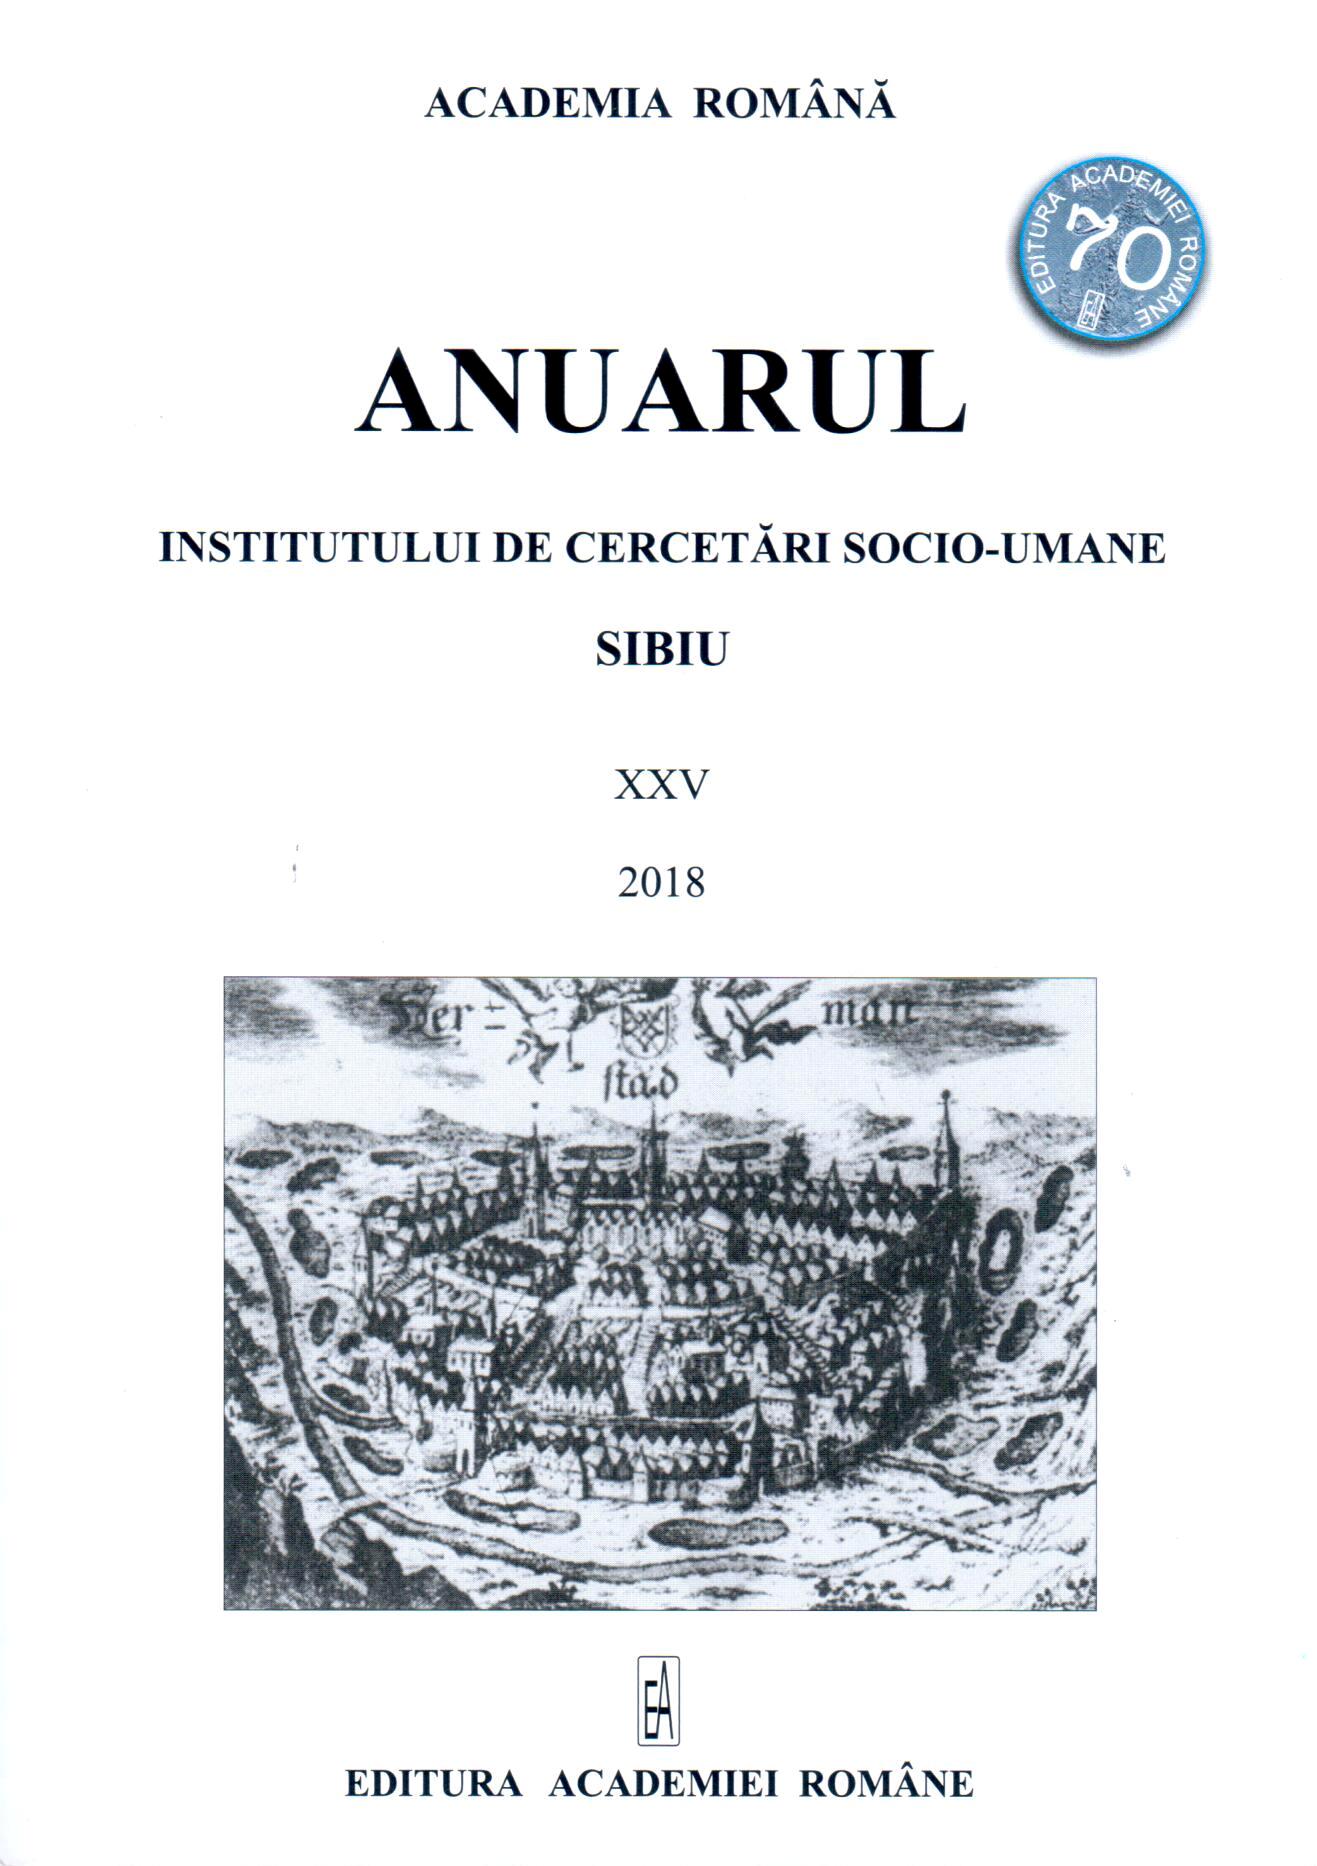 In Search of Medieval Settlements on Mureș River Valley − Sâmbăteni and Păuliș Cover Image